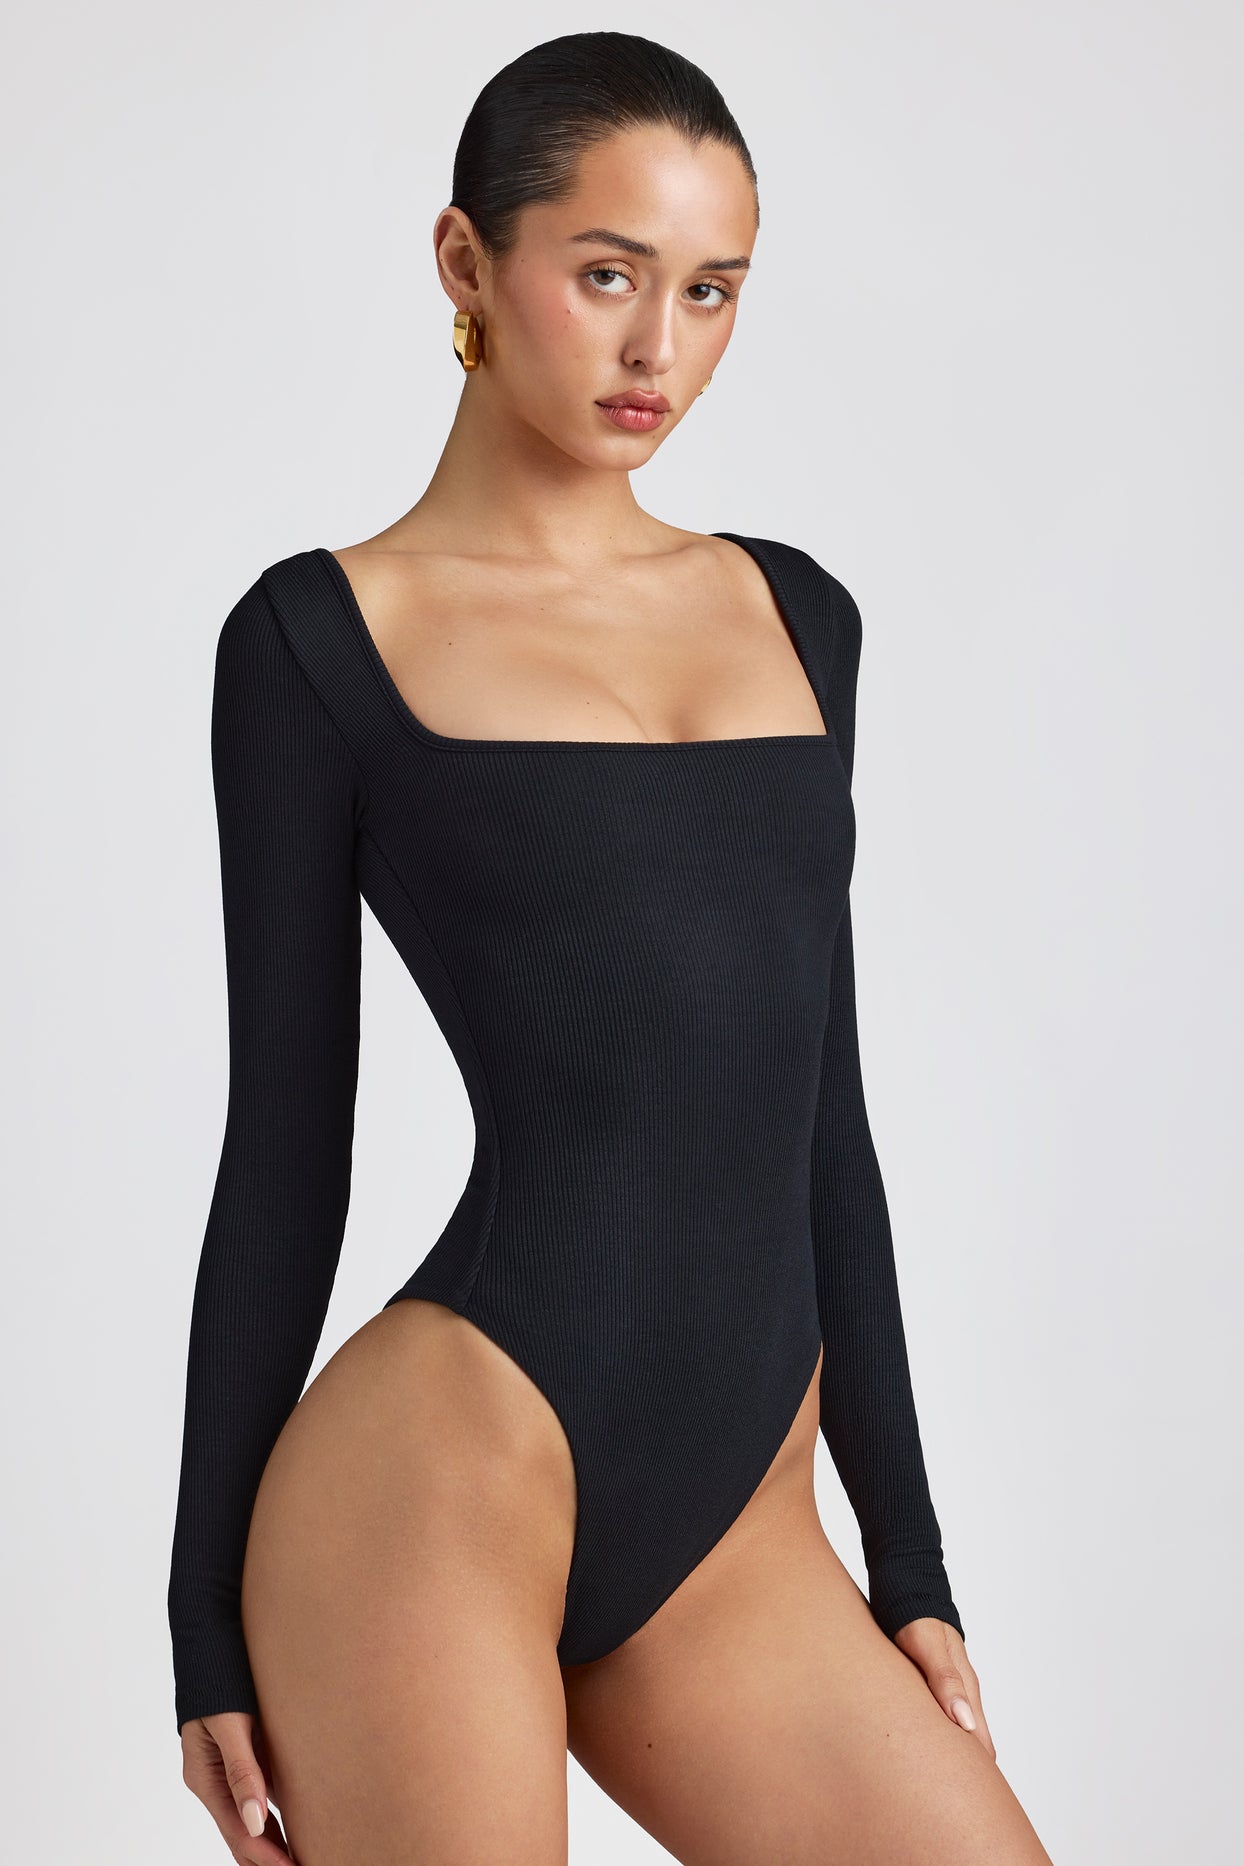 Pass Play Ribbed Bodysuit in Black  Ribbed bodysuit, Black bodysuit,  Bodysuit